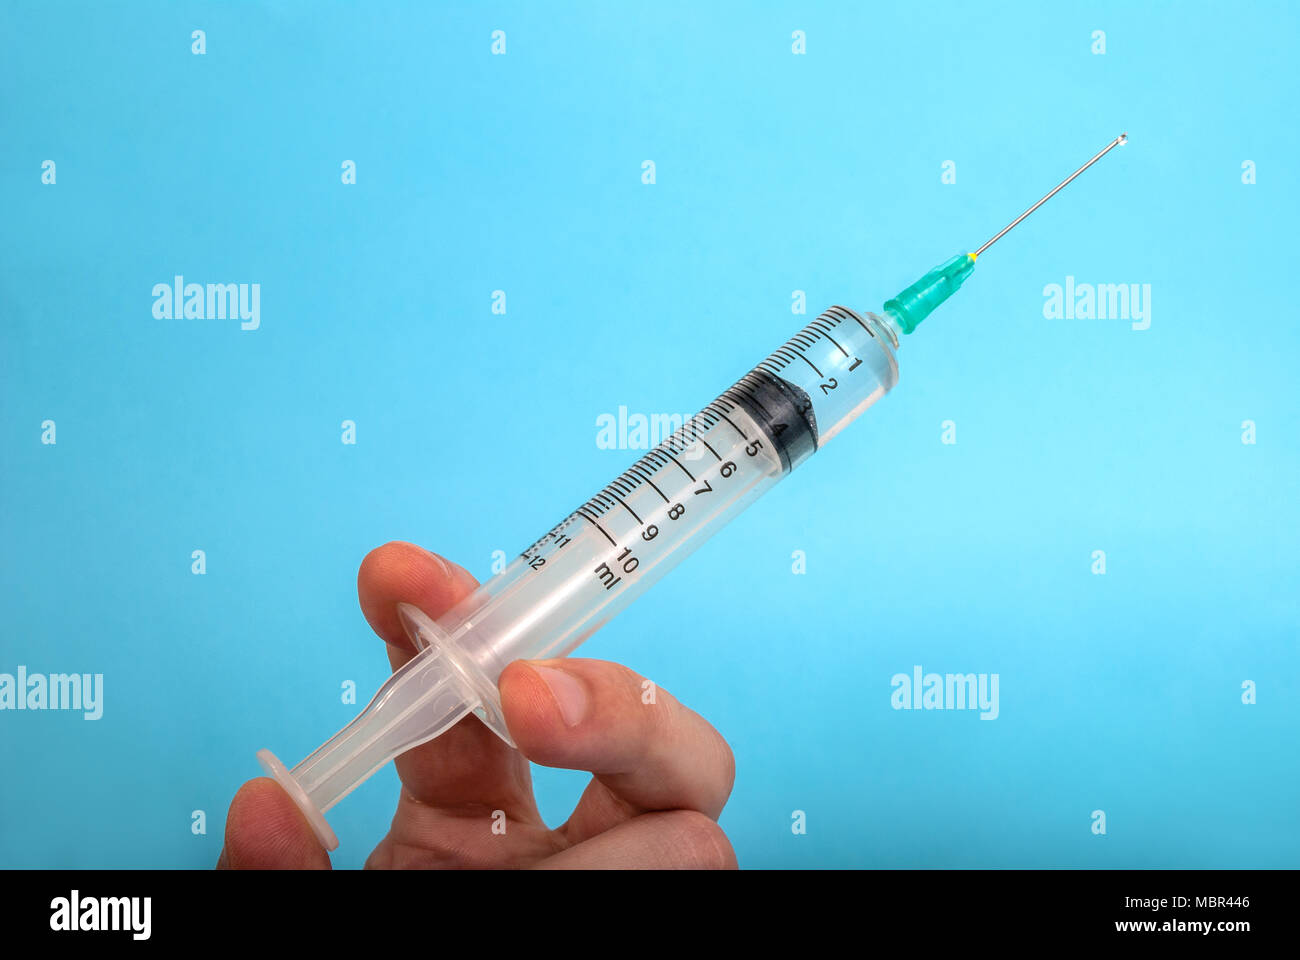 Injection with a needle in the hand without medical gloves and a drop of a drug isolated on a blue background, medical concept Stock Photo